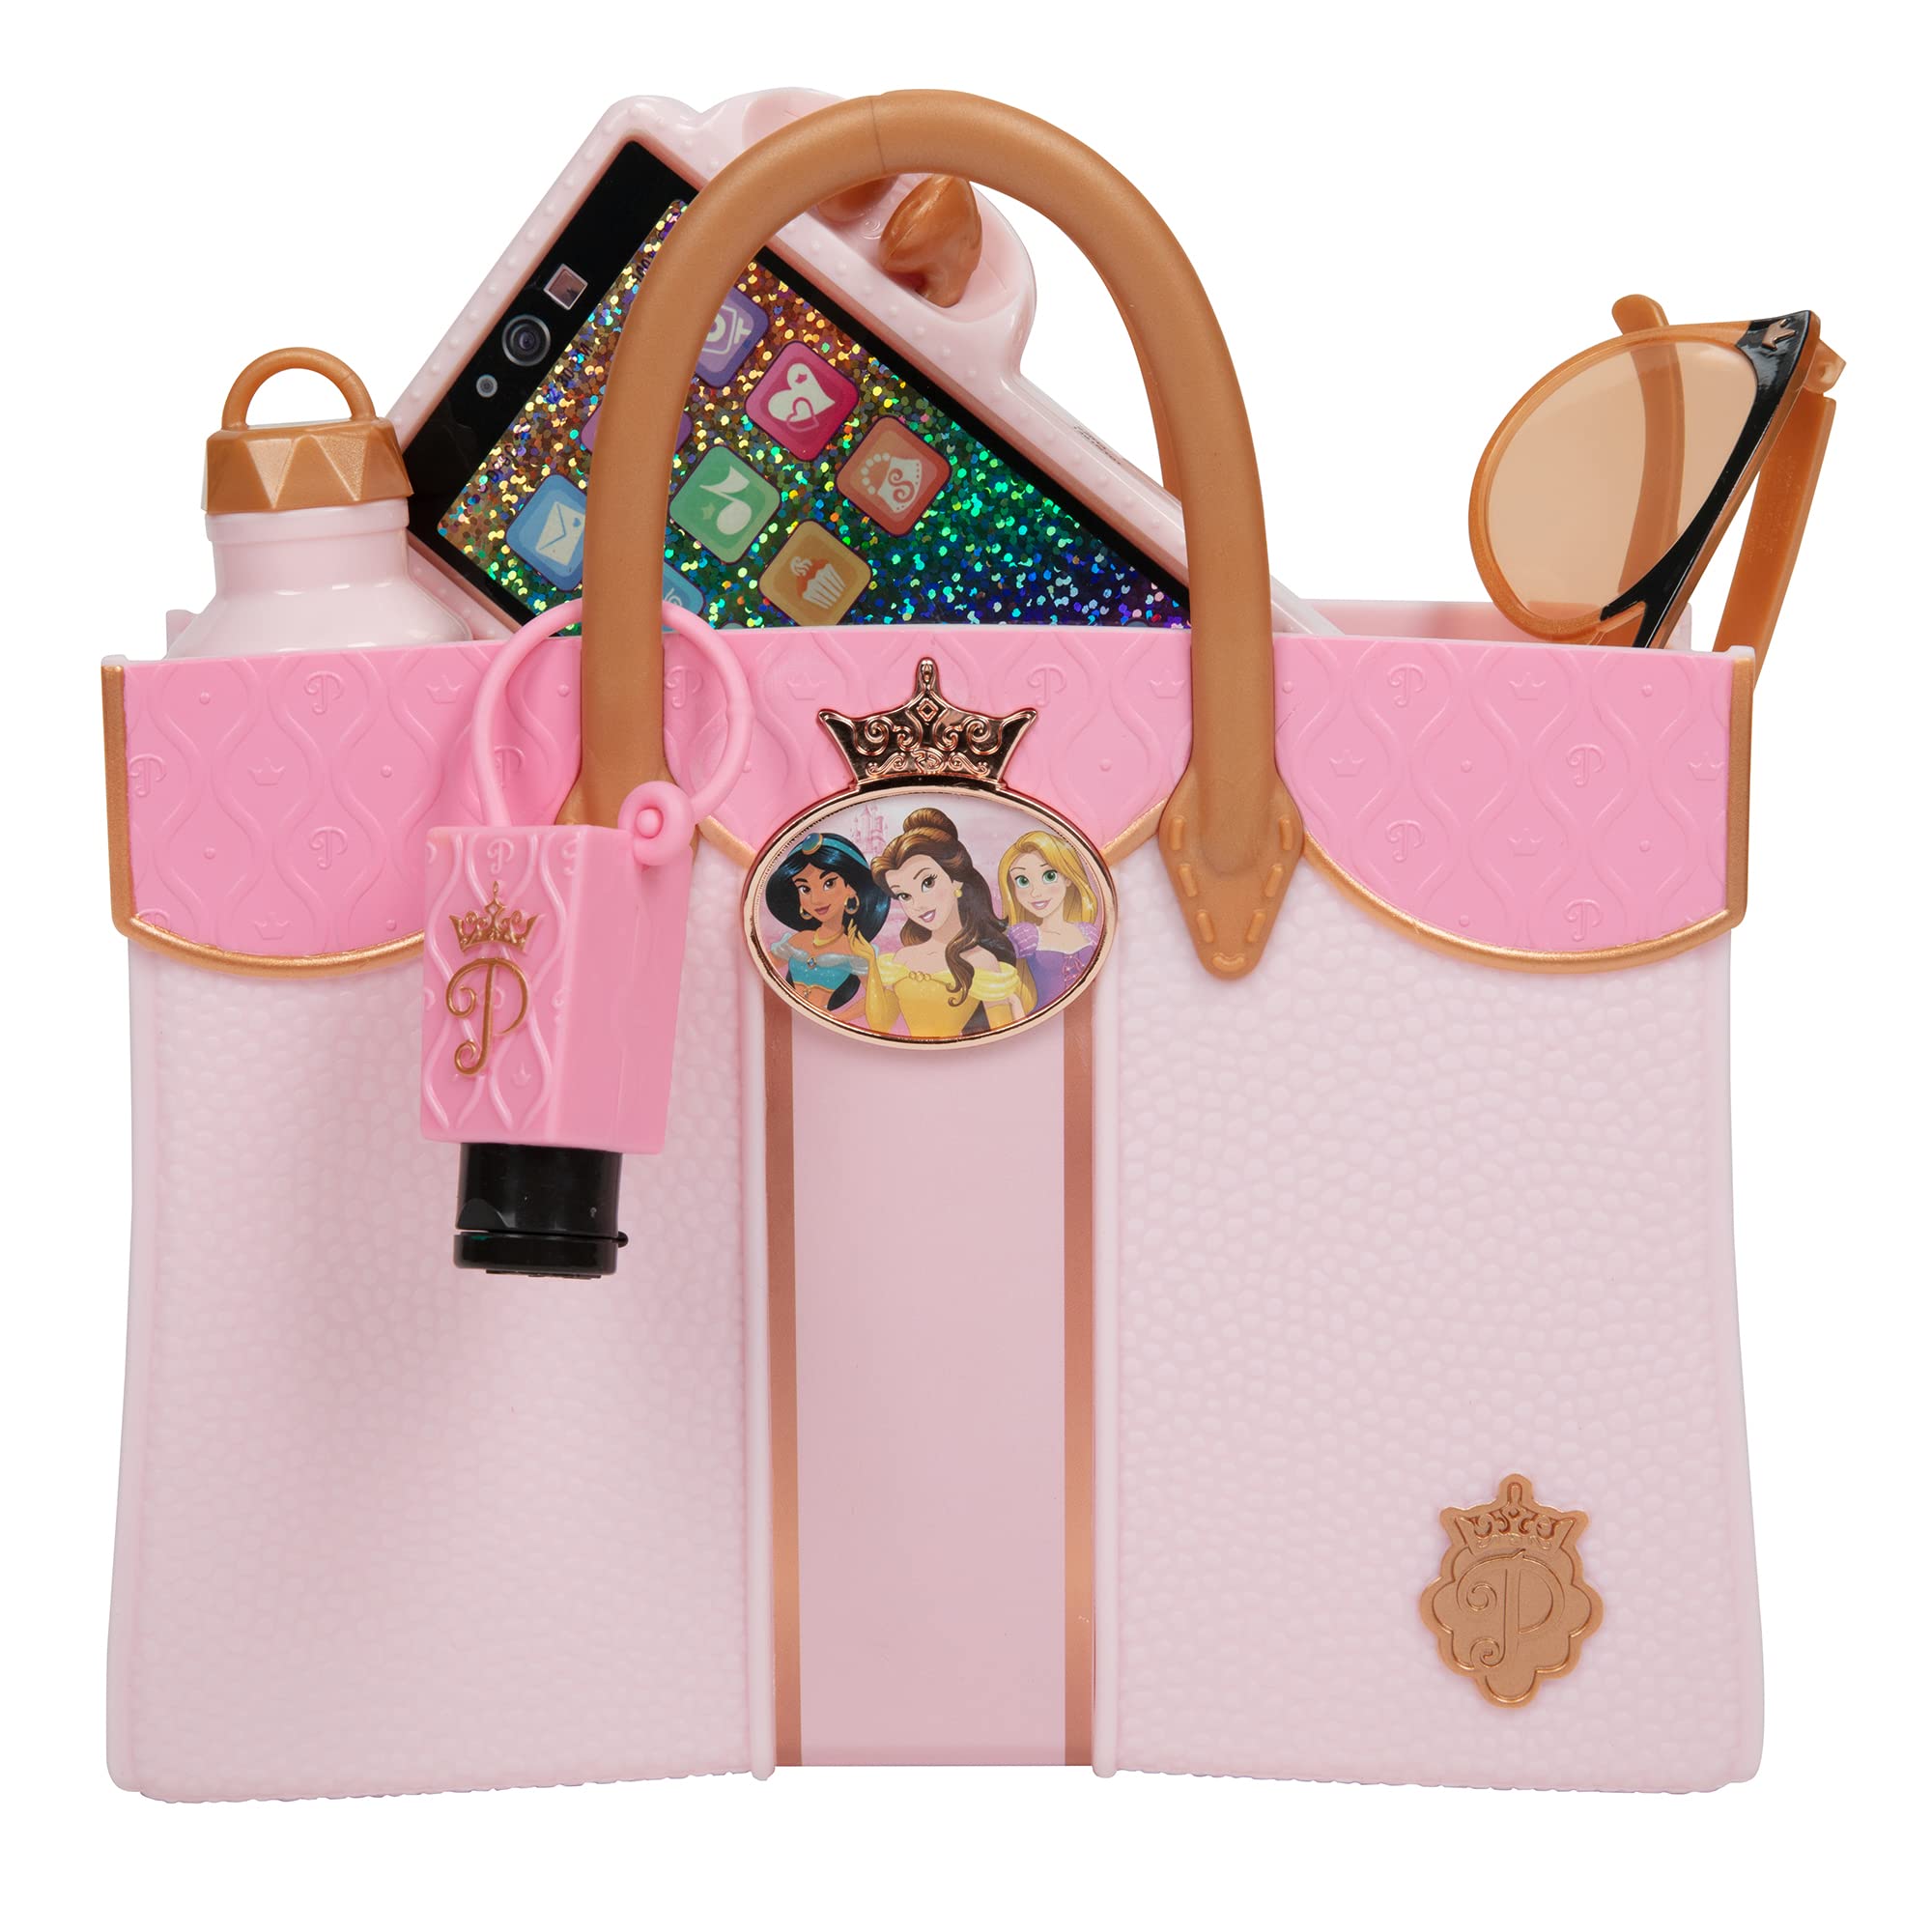 Disney Princess Style Collection Deluxe Tote Bag & Essentials [Amazon Exclusive], Pink